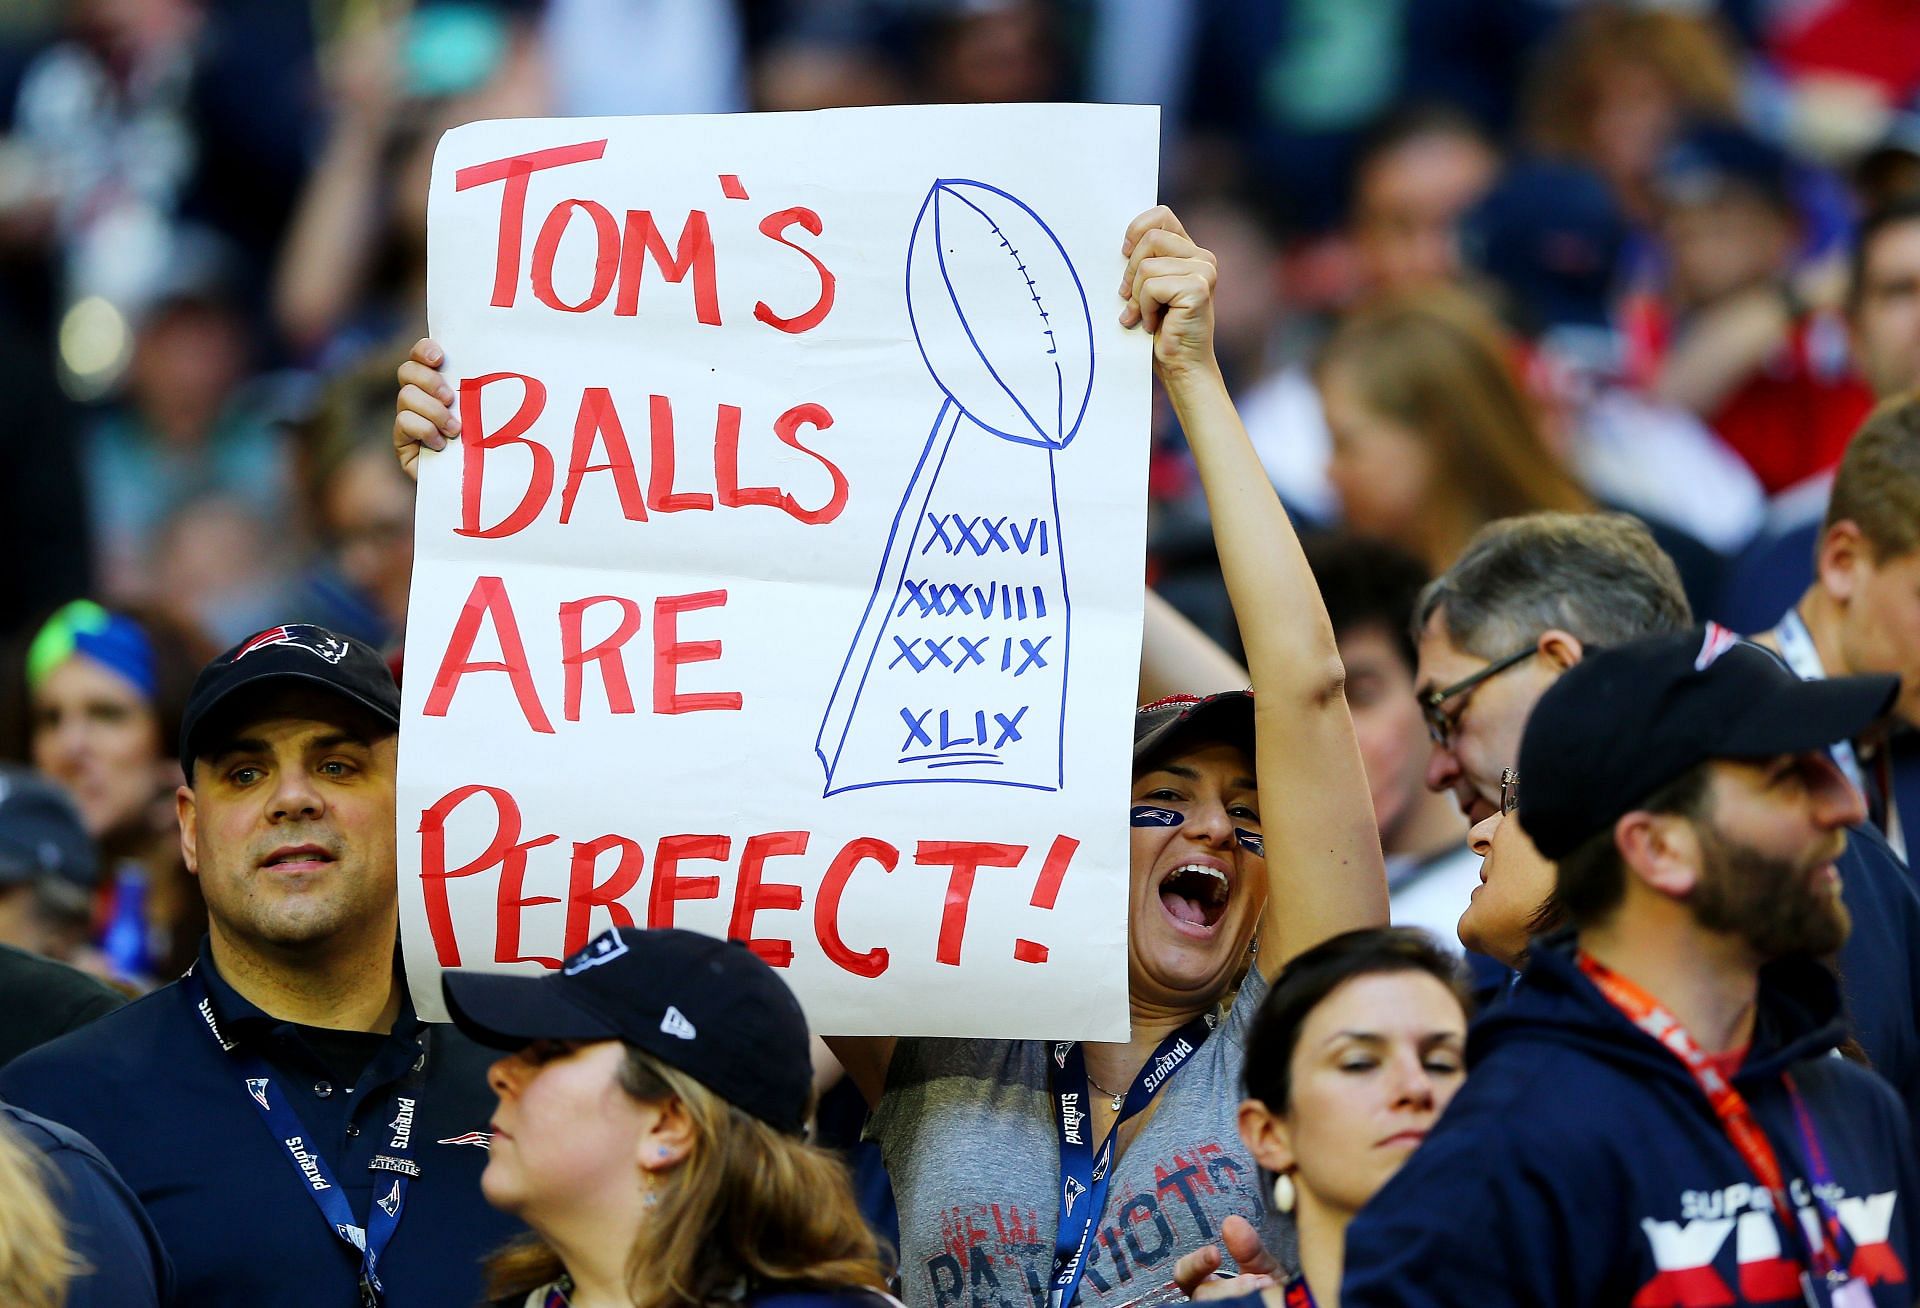 A New England Patriots fan cheering on her team and Tom Brady